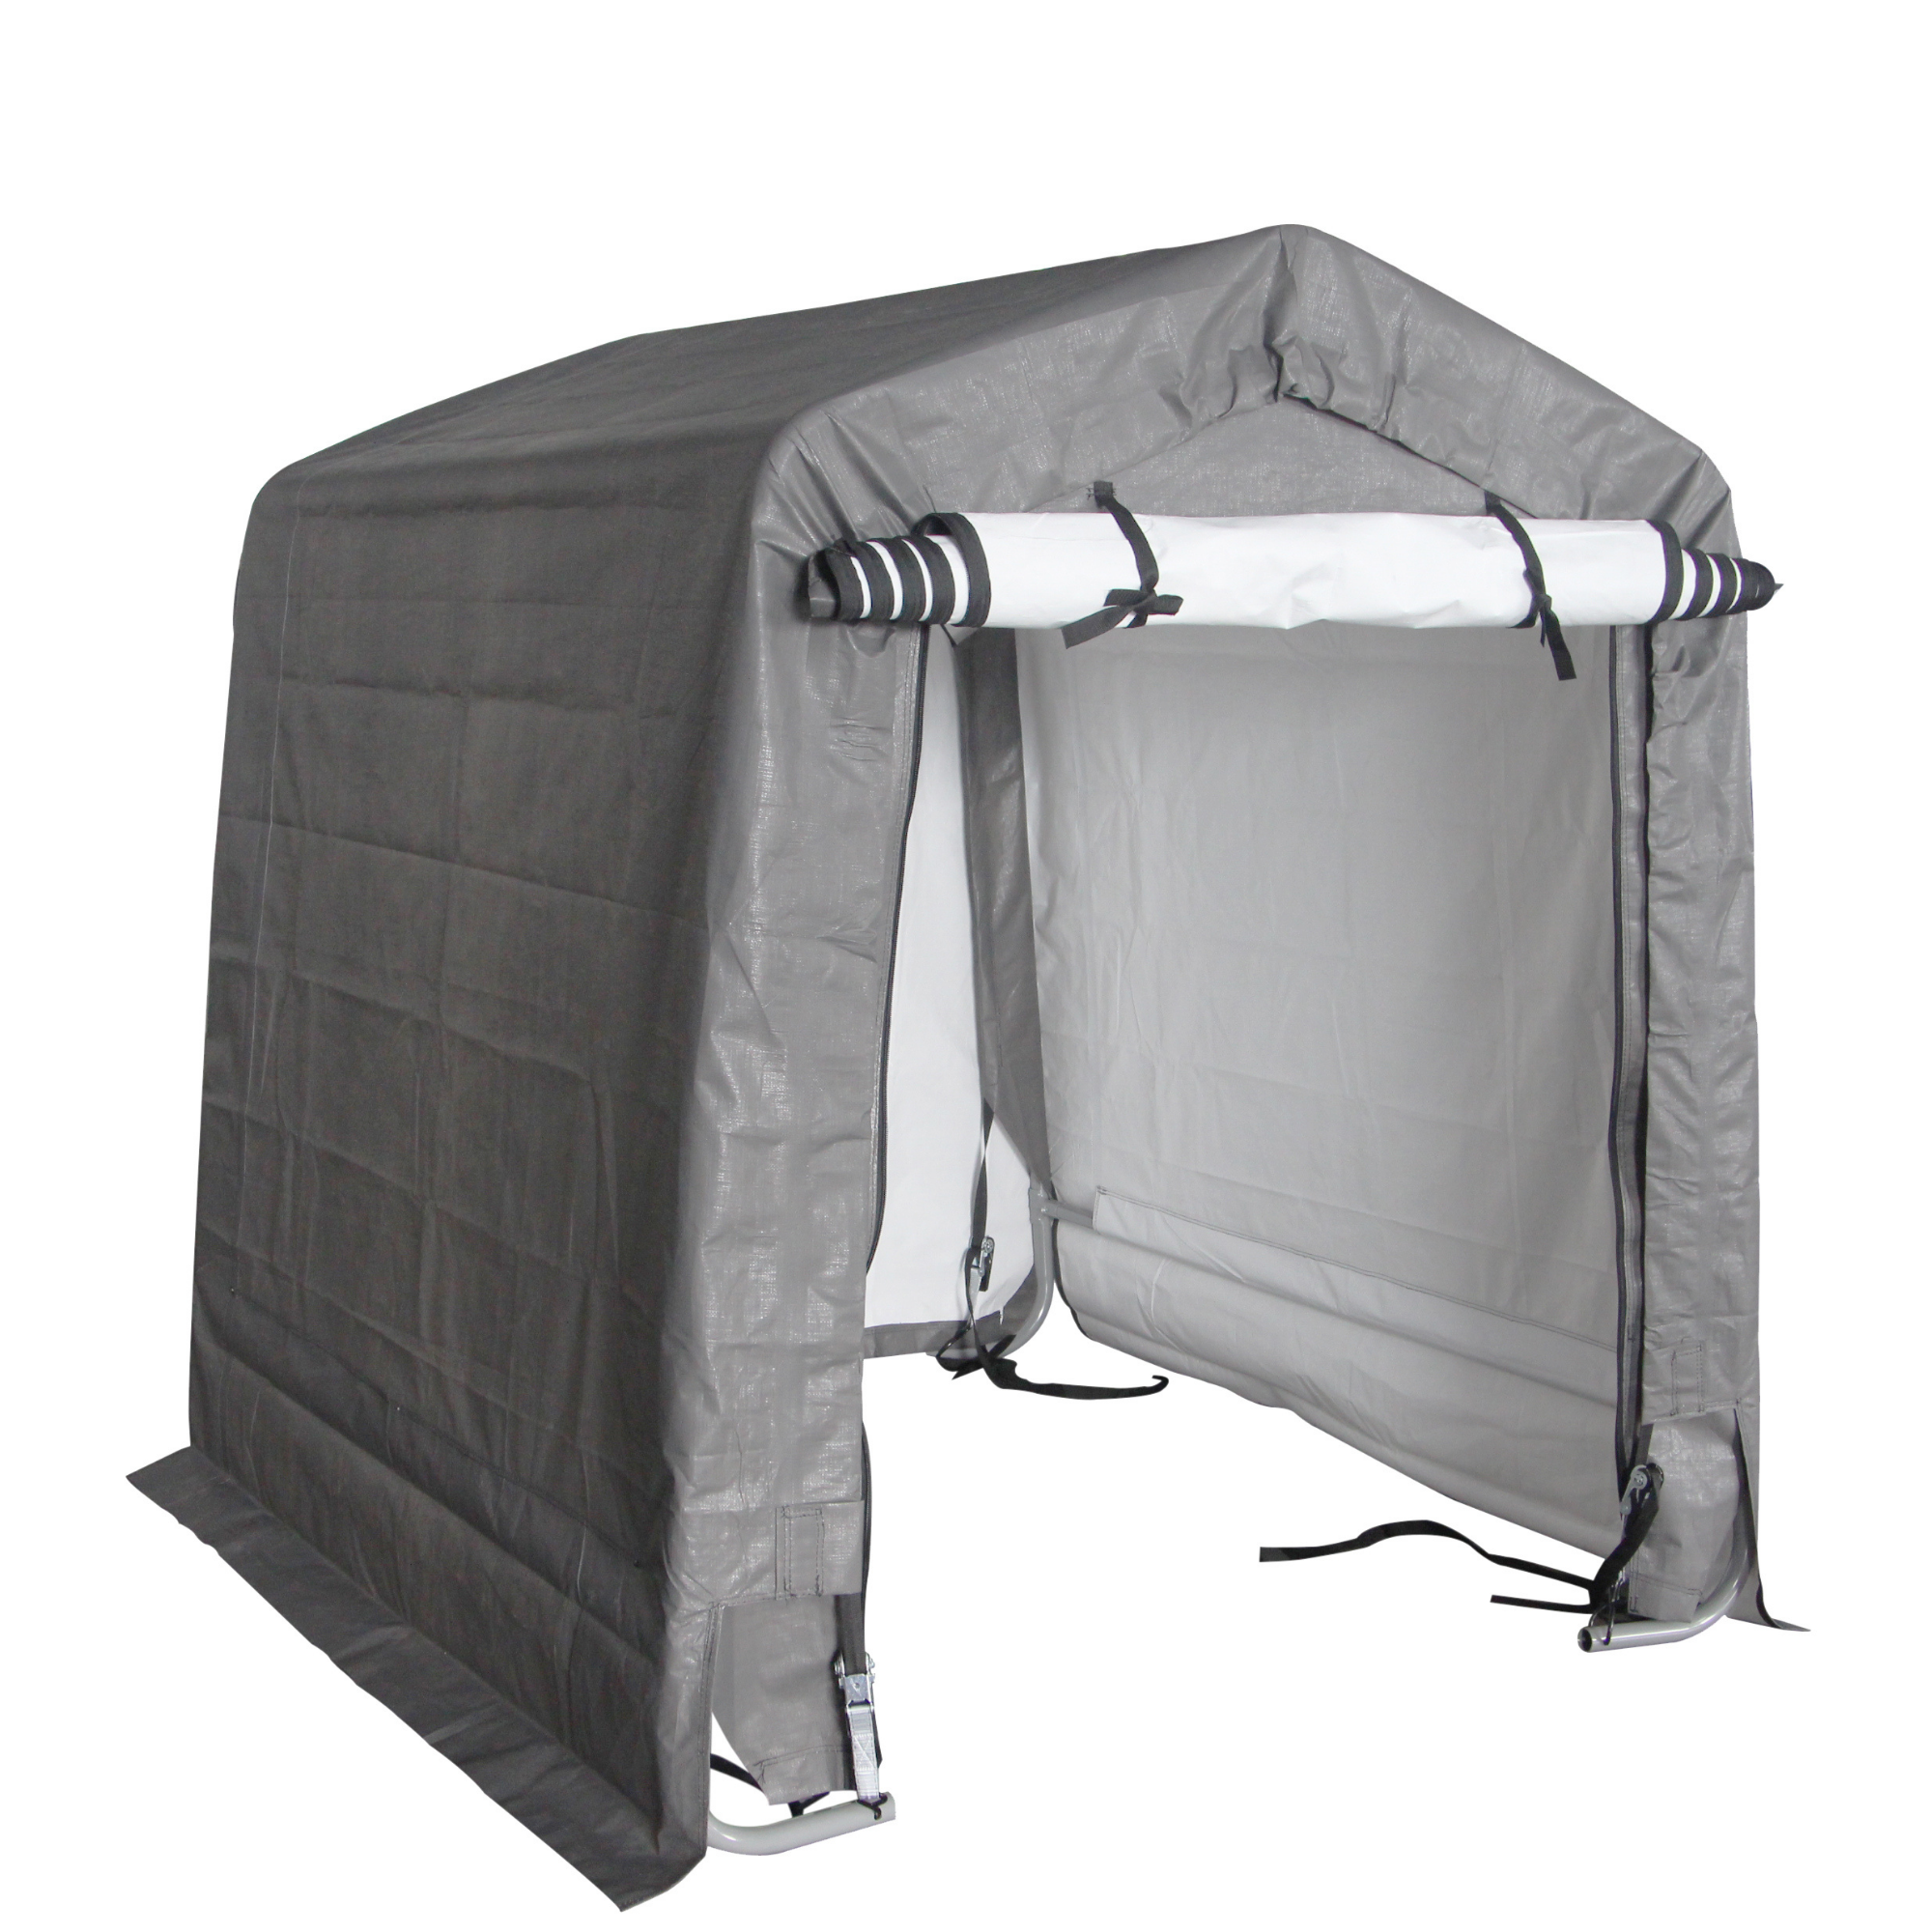 Billyoh Flexi Pop Up Portable Fabric Shed 6x6